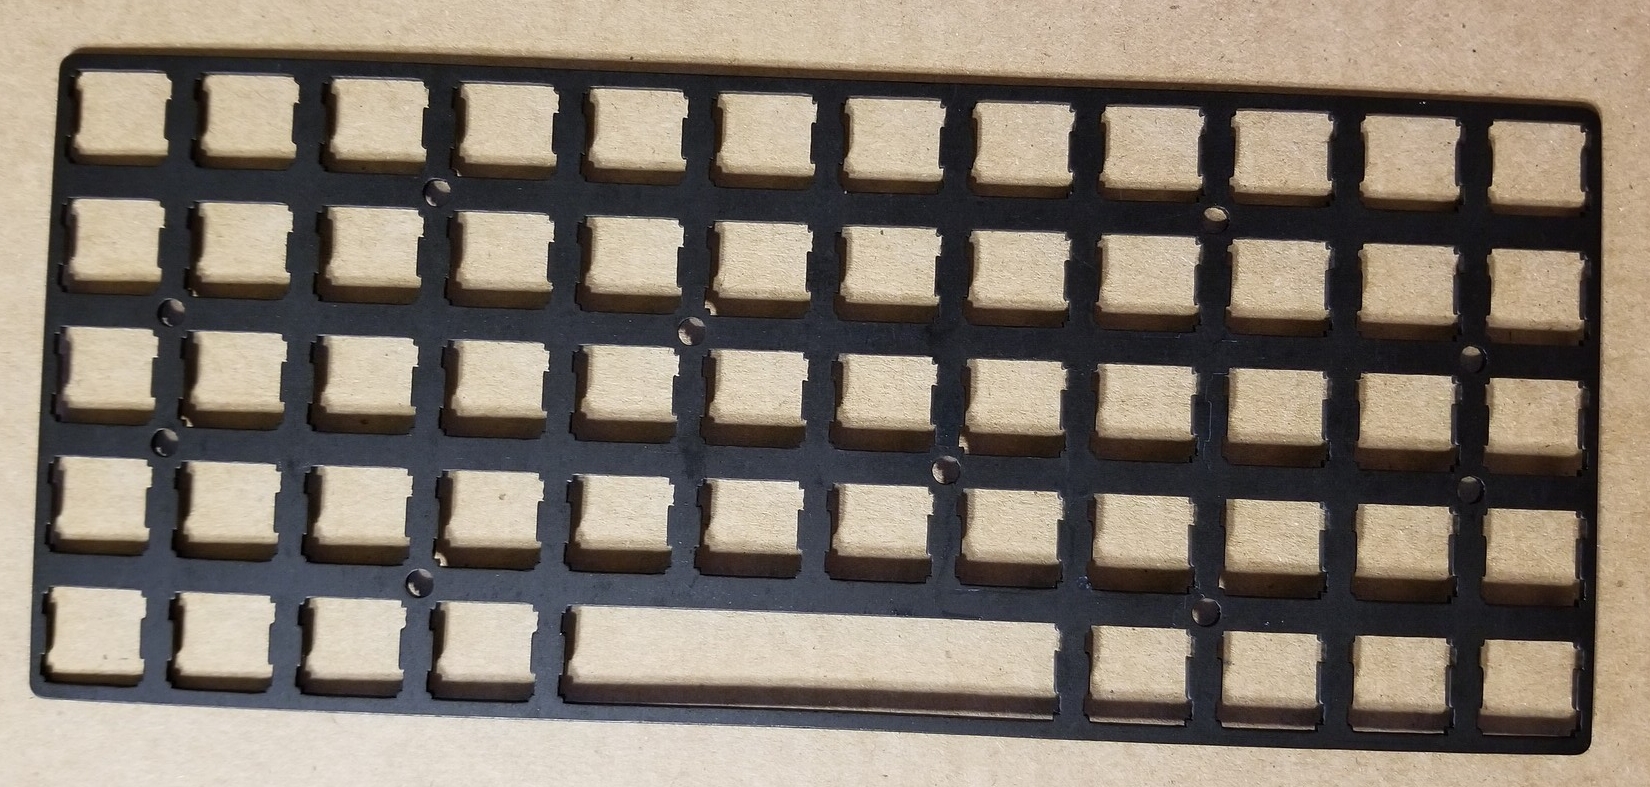 Preonic plate